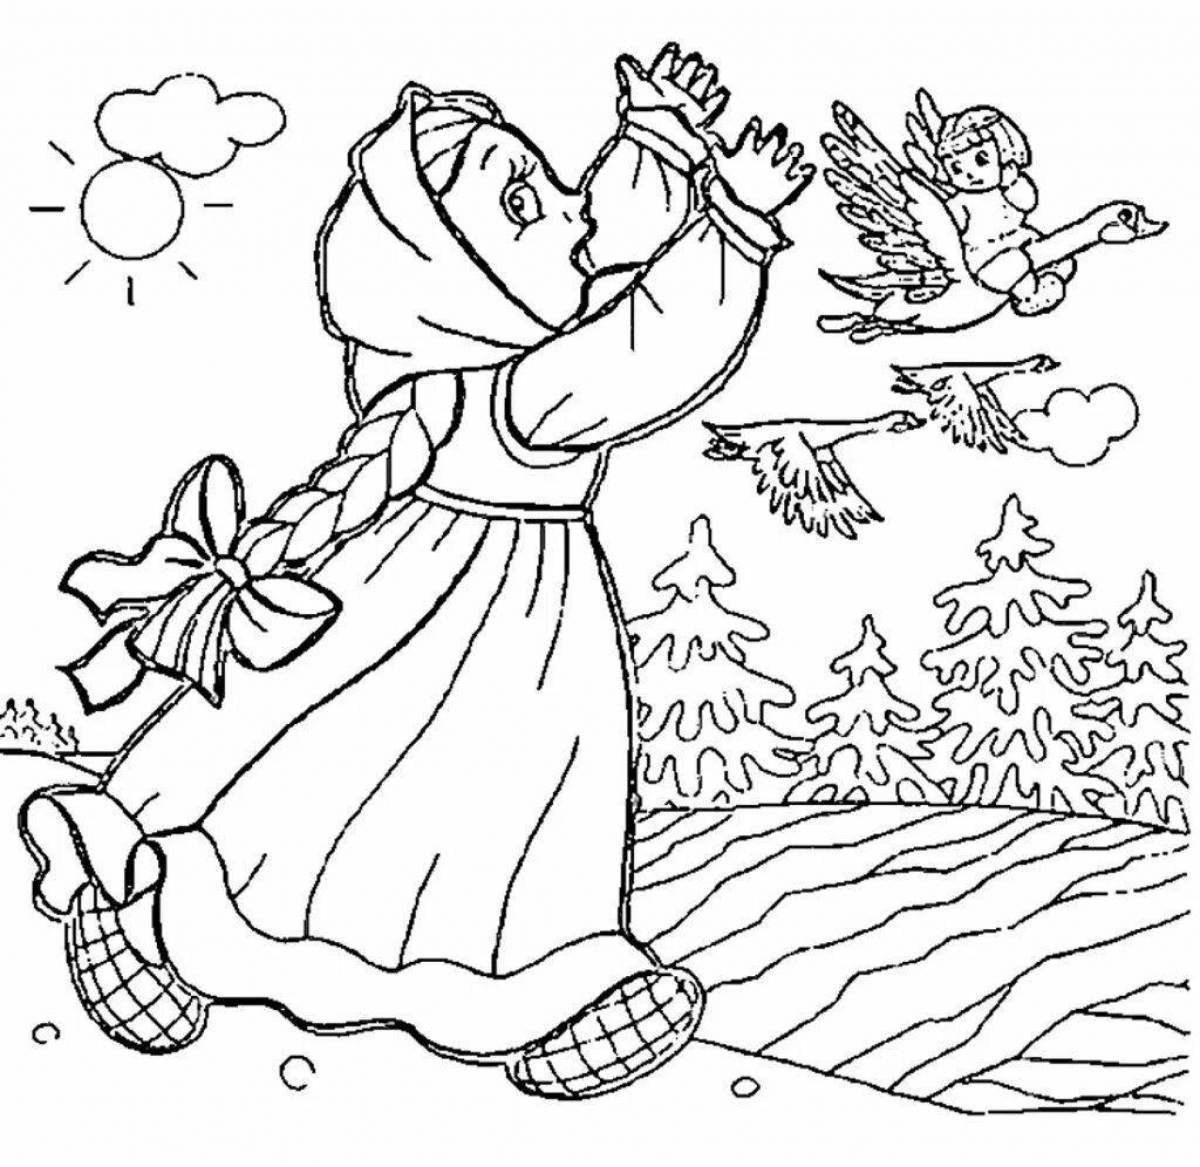 Fairy swan geese coloring pages for kids